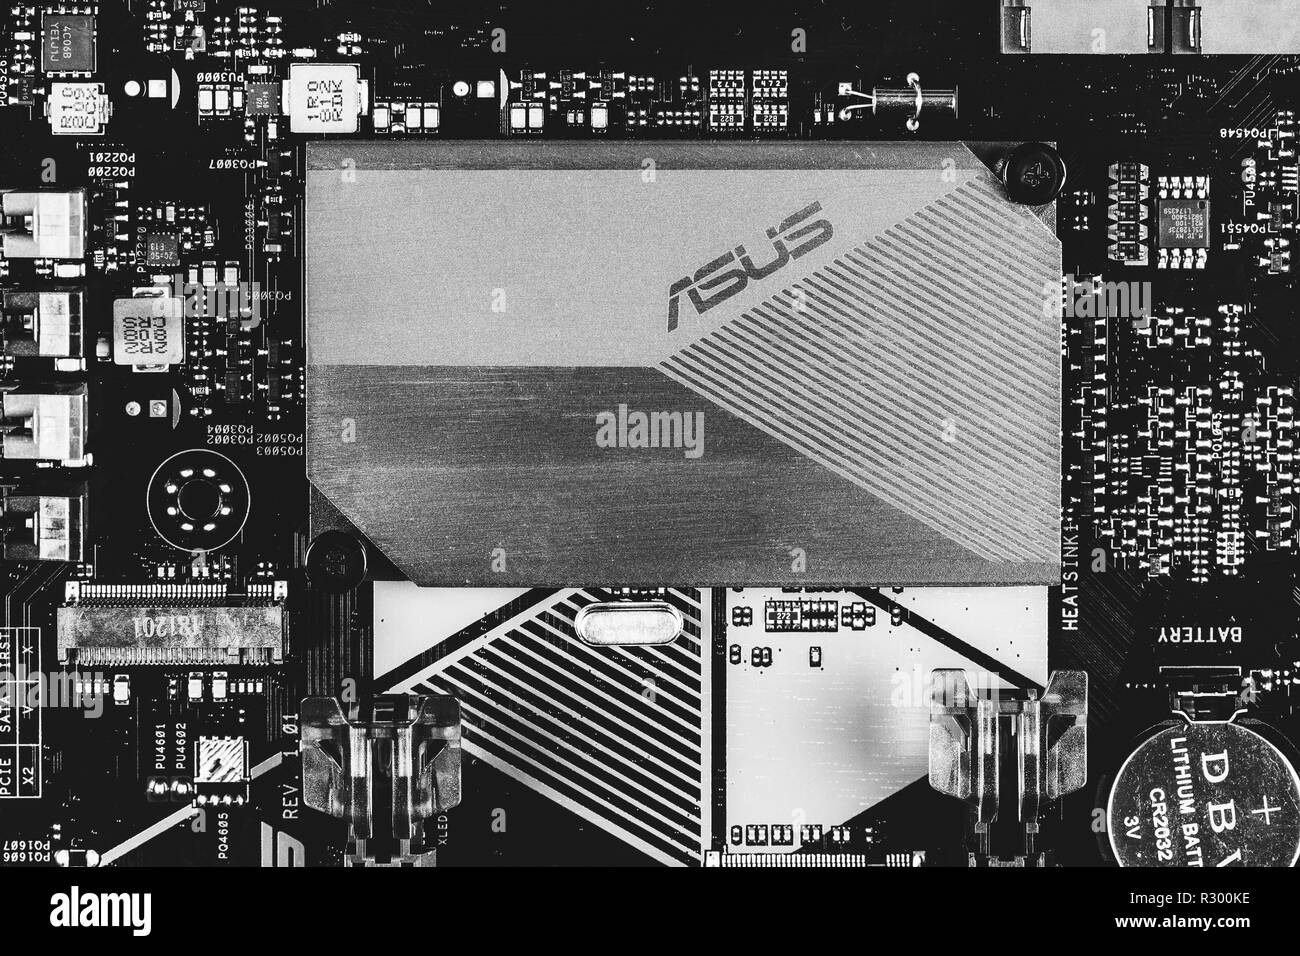 Maykop, Russia - November 9, 2018: part of ASUS motherboard with aluminum radiator chipset top view close-up, black and white photo Stock Photo